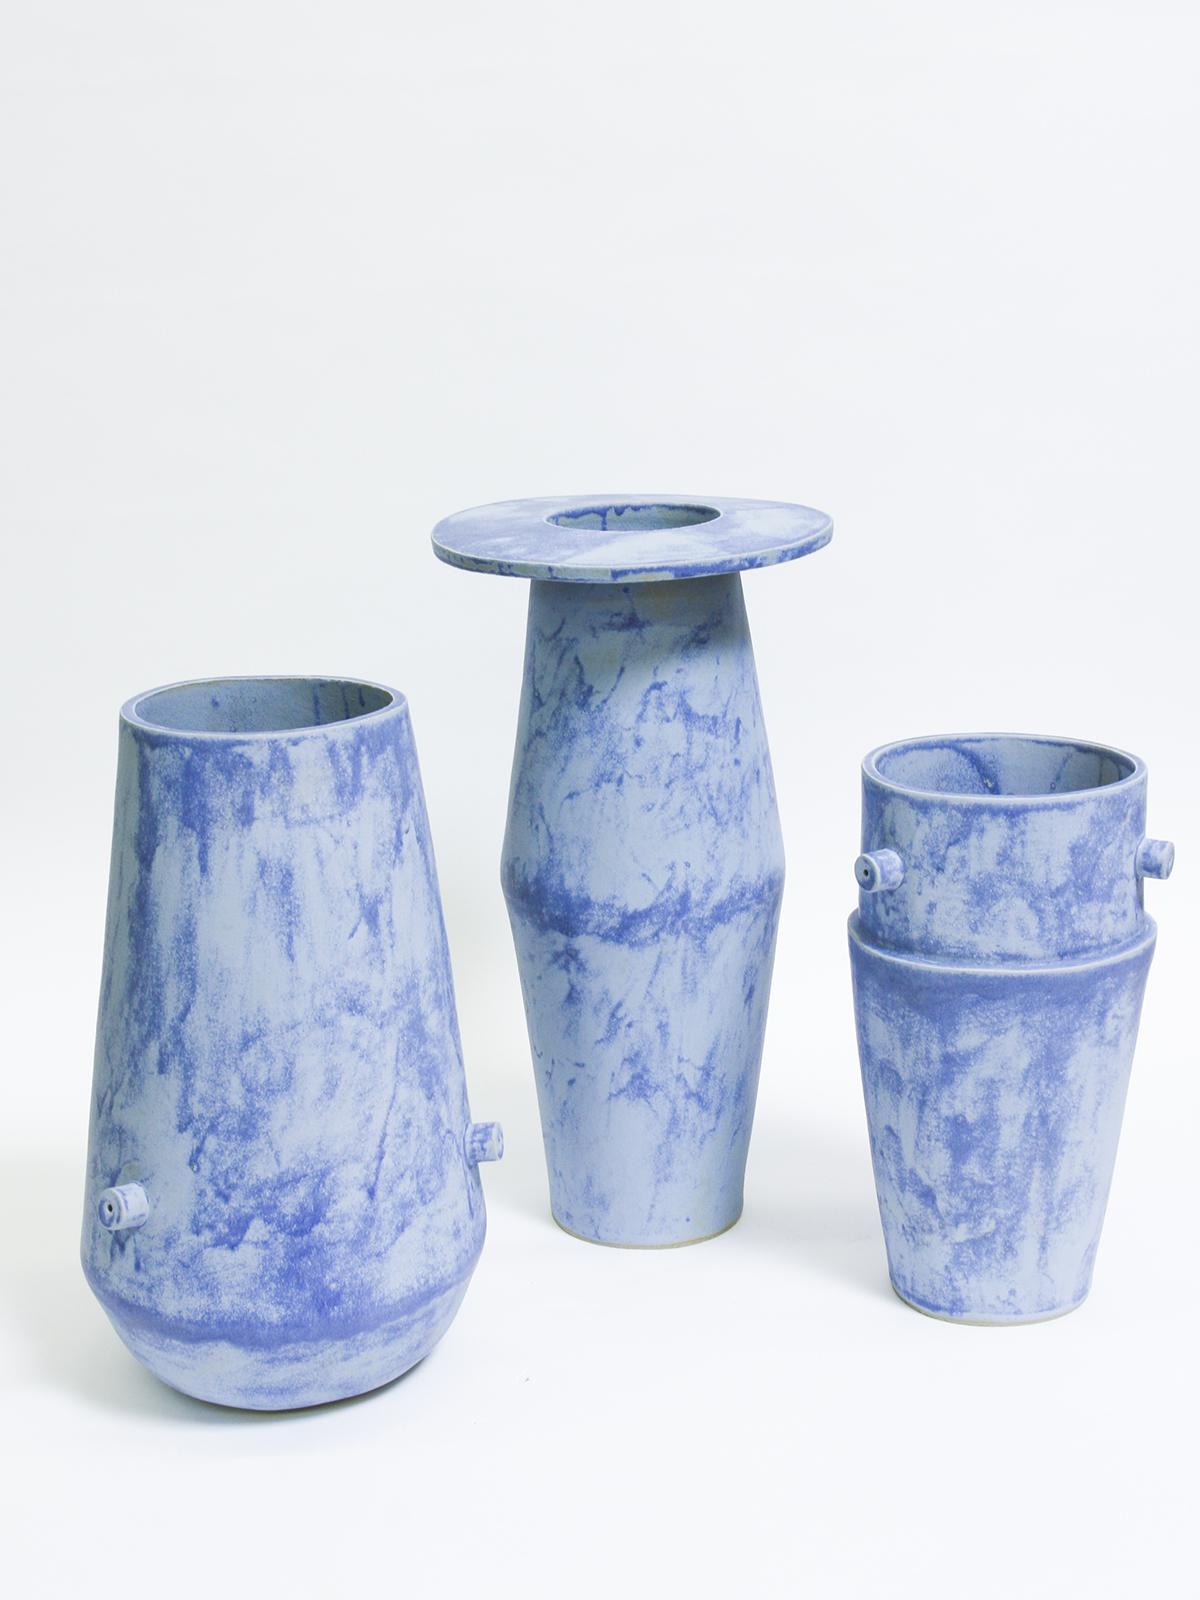 Giant diamond ceramic vase in matte blue. Made to order.

BZIPPY clay goods are one of a kind stoneware / earthenware editions with variations in glazes depending on the high fire process. Please note that works are unique and not exactly the same